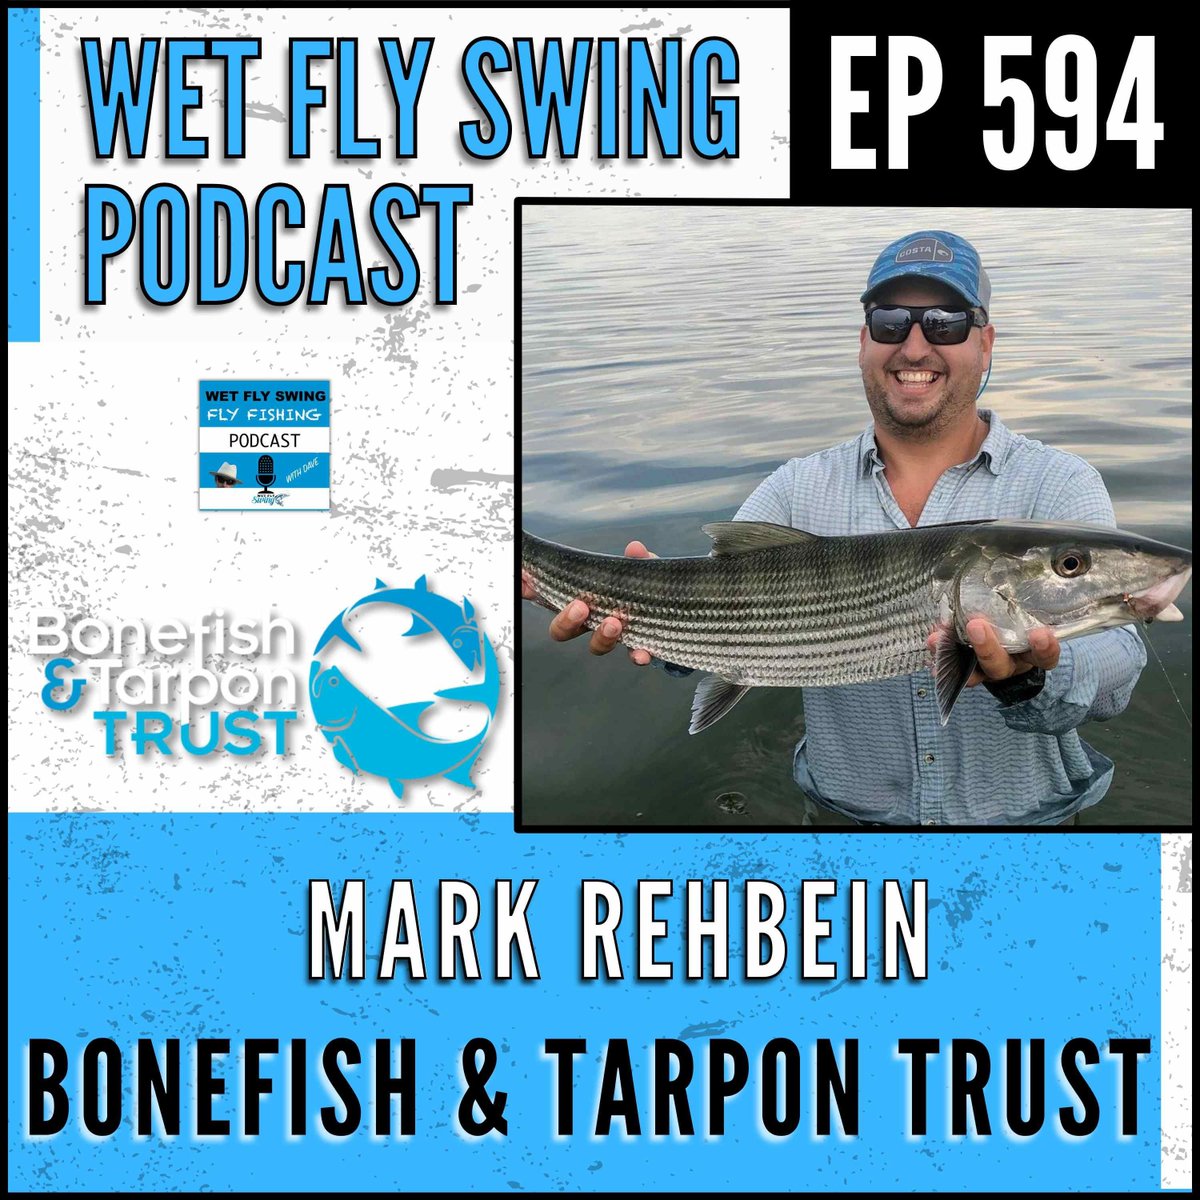 Today, we dive deep into the conservation with Mark Rehbein from the Bonefish & Tarpon Trust. Listen Here >> buff.ly/3vN1B5m